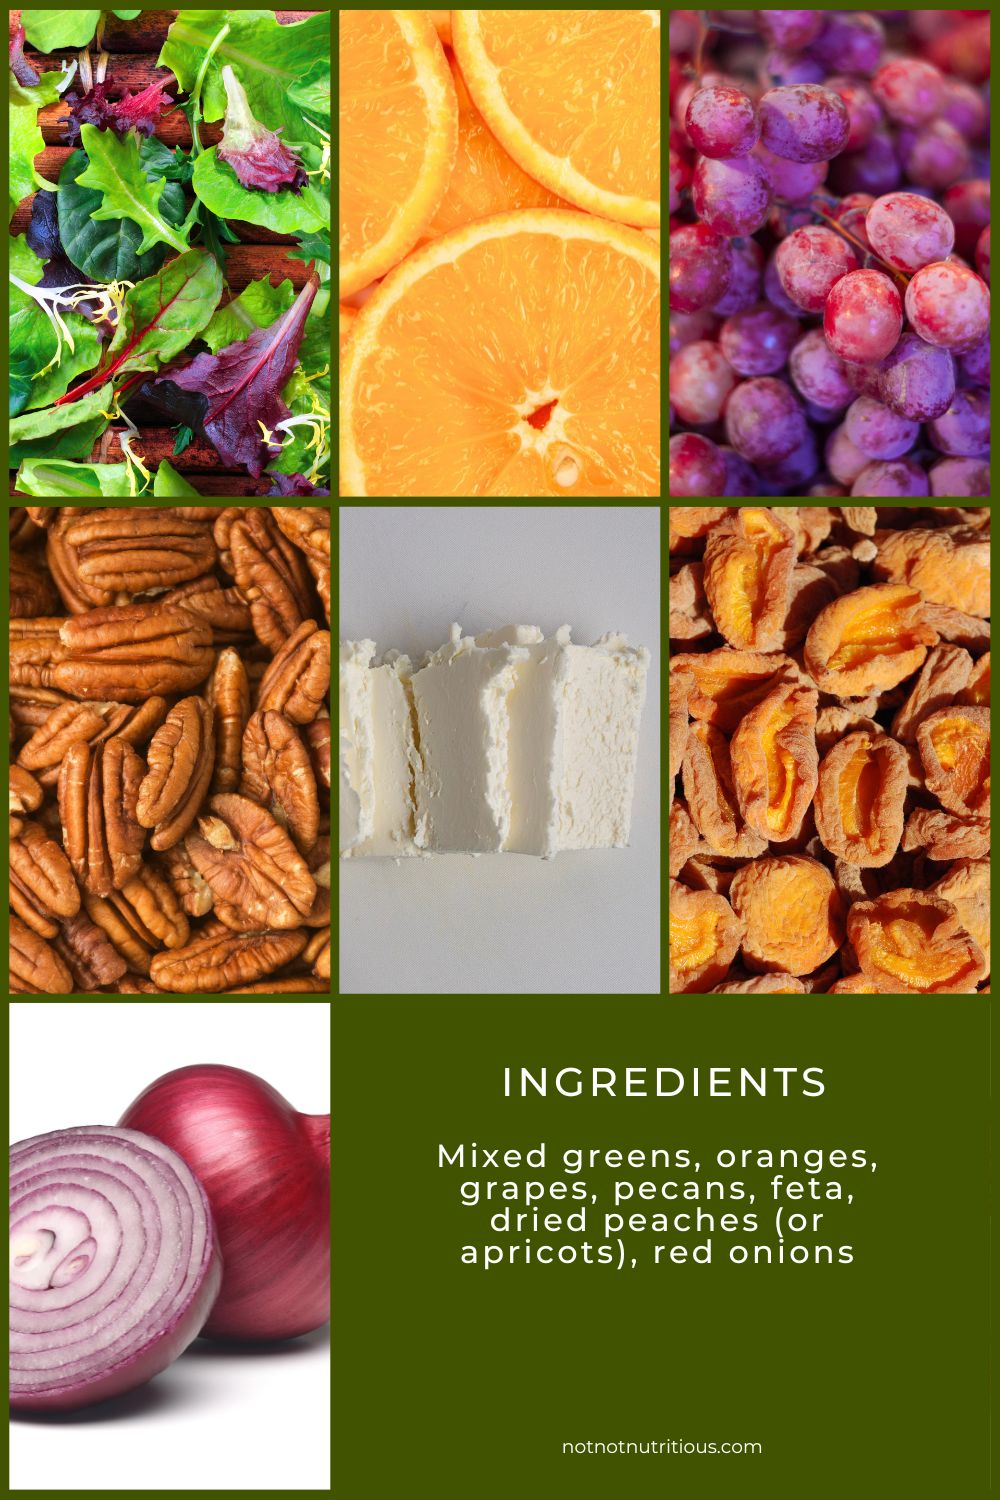 Ingredients for Fruit, Nut, and Feta Salad, including mixed greens, orange slices, grapes, pecans, feta (dairy or plant-based) and dried peaches (or apricots)